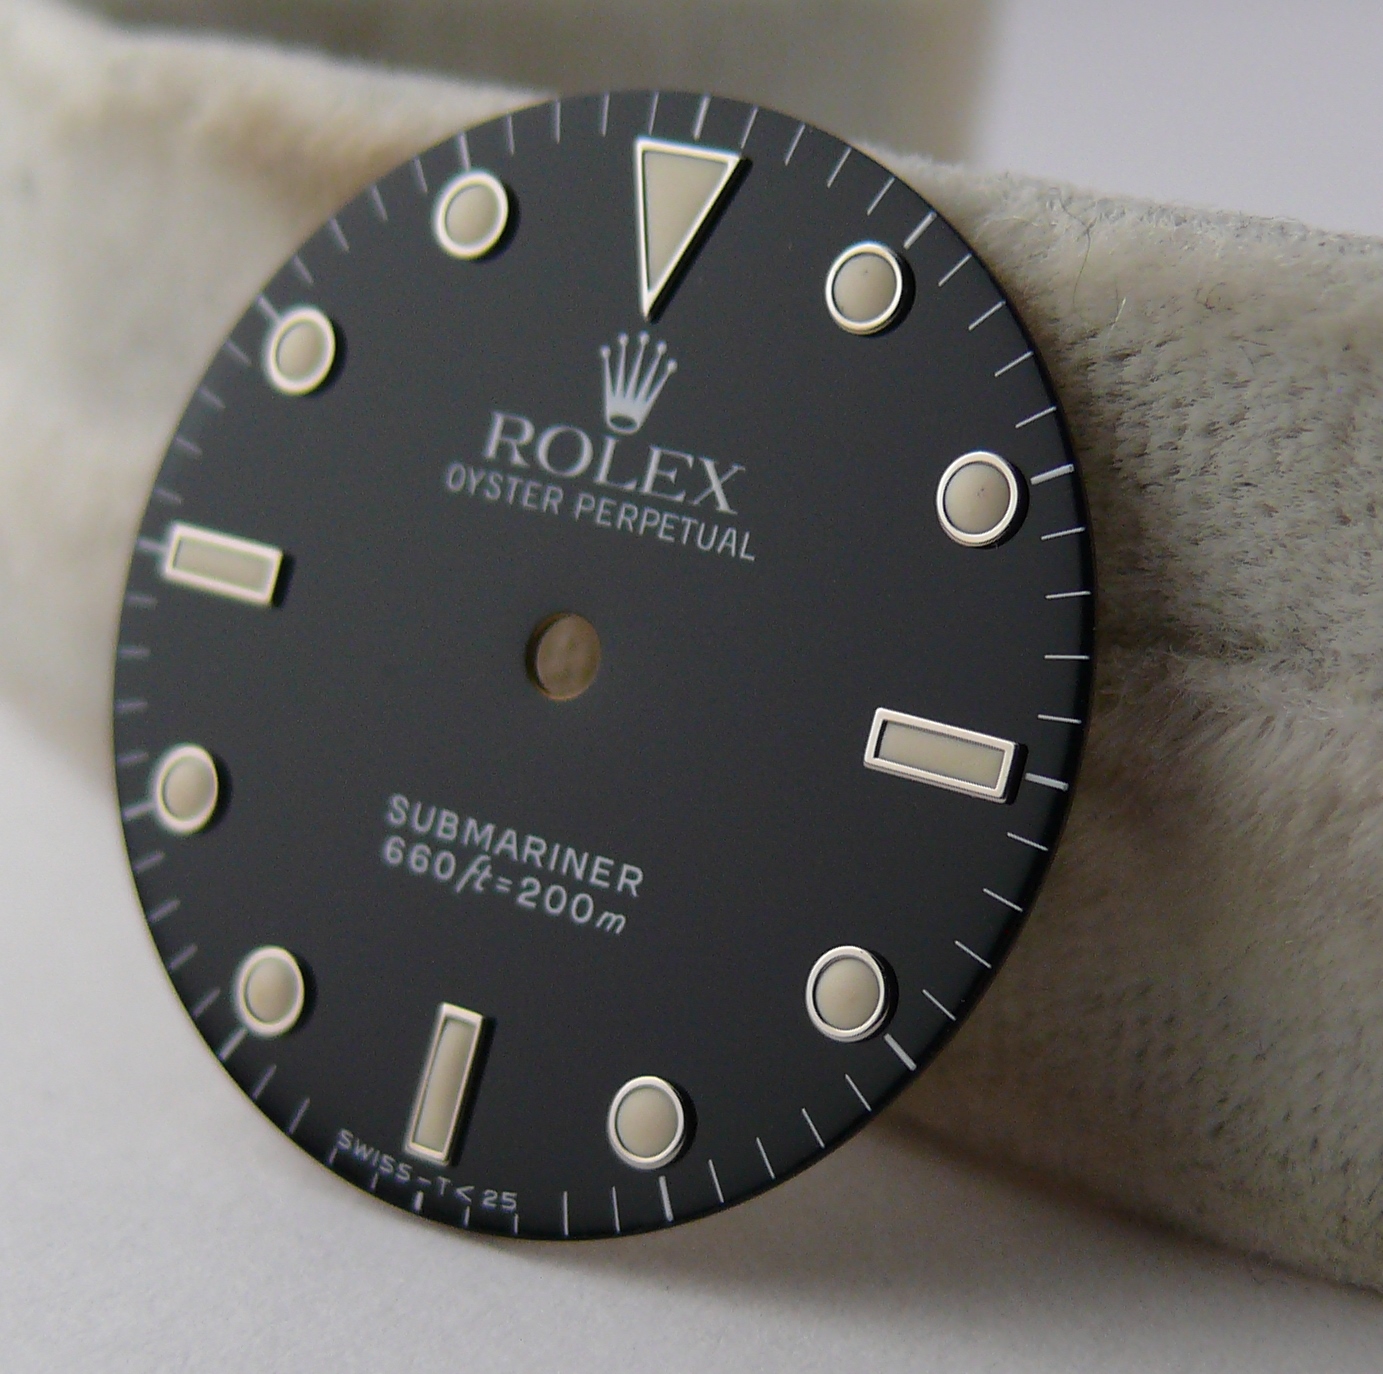 Vintage Gents Rolex Submariner Dial suitable for ref 5513. Please note dial is clean in condition. - Image 4 of 4